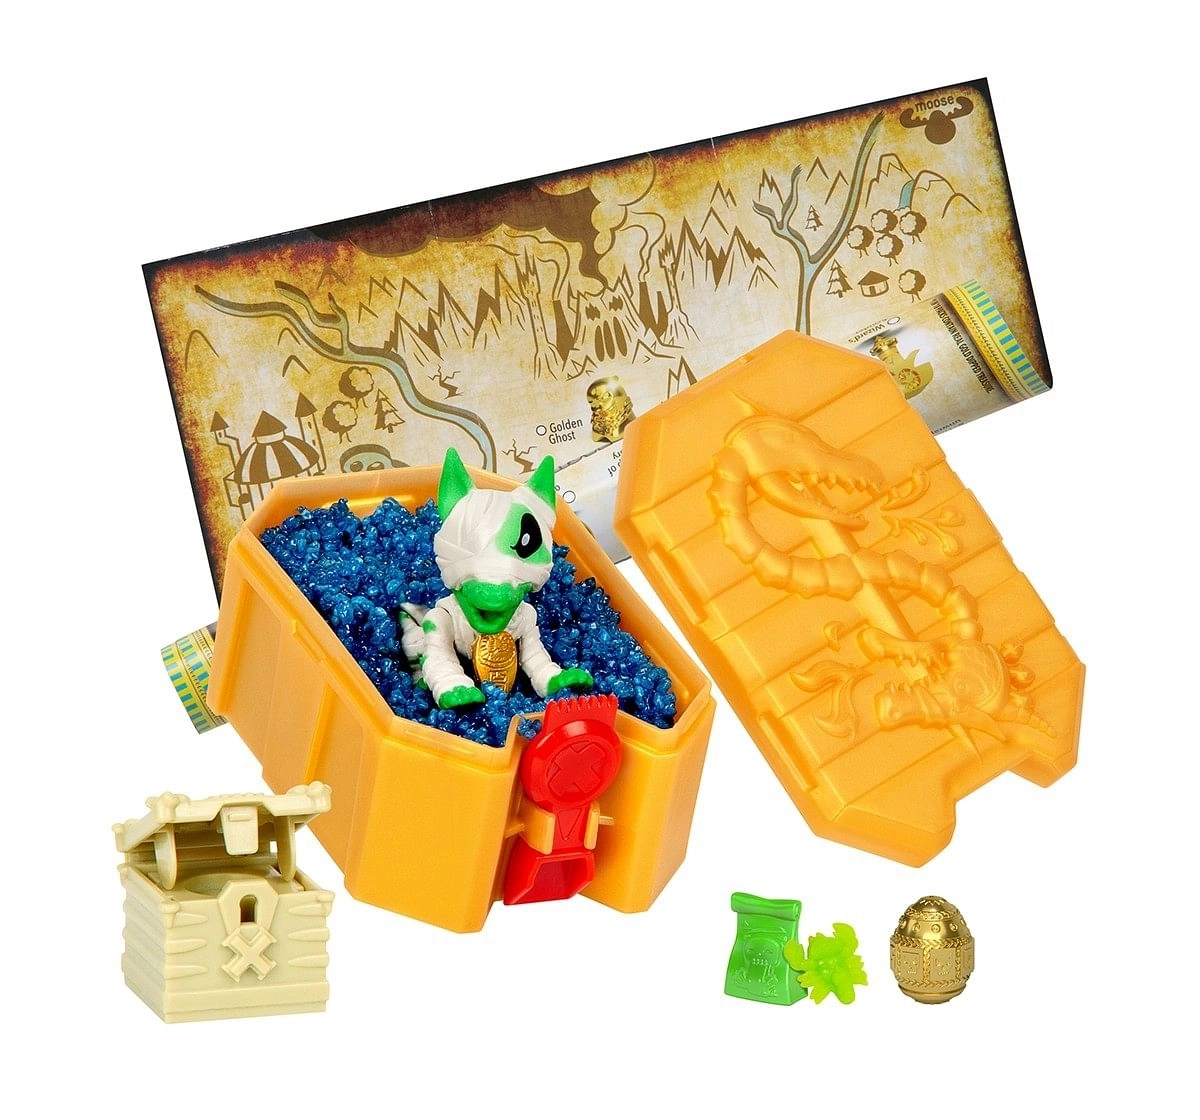 Treasure X King's Gold Mini Beast Pack Action Figure Play Sets for age 5Y+ 